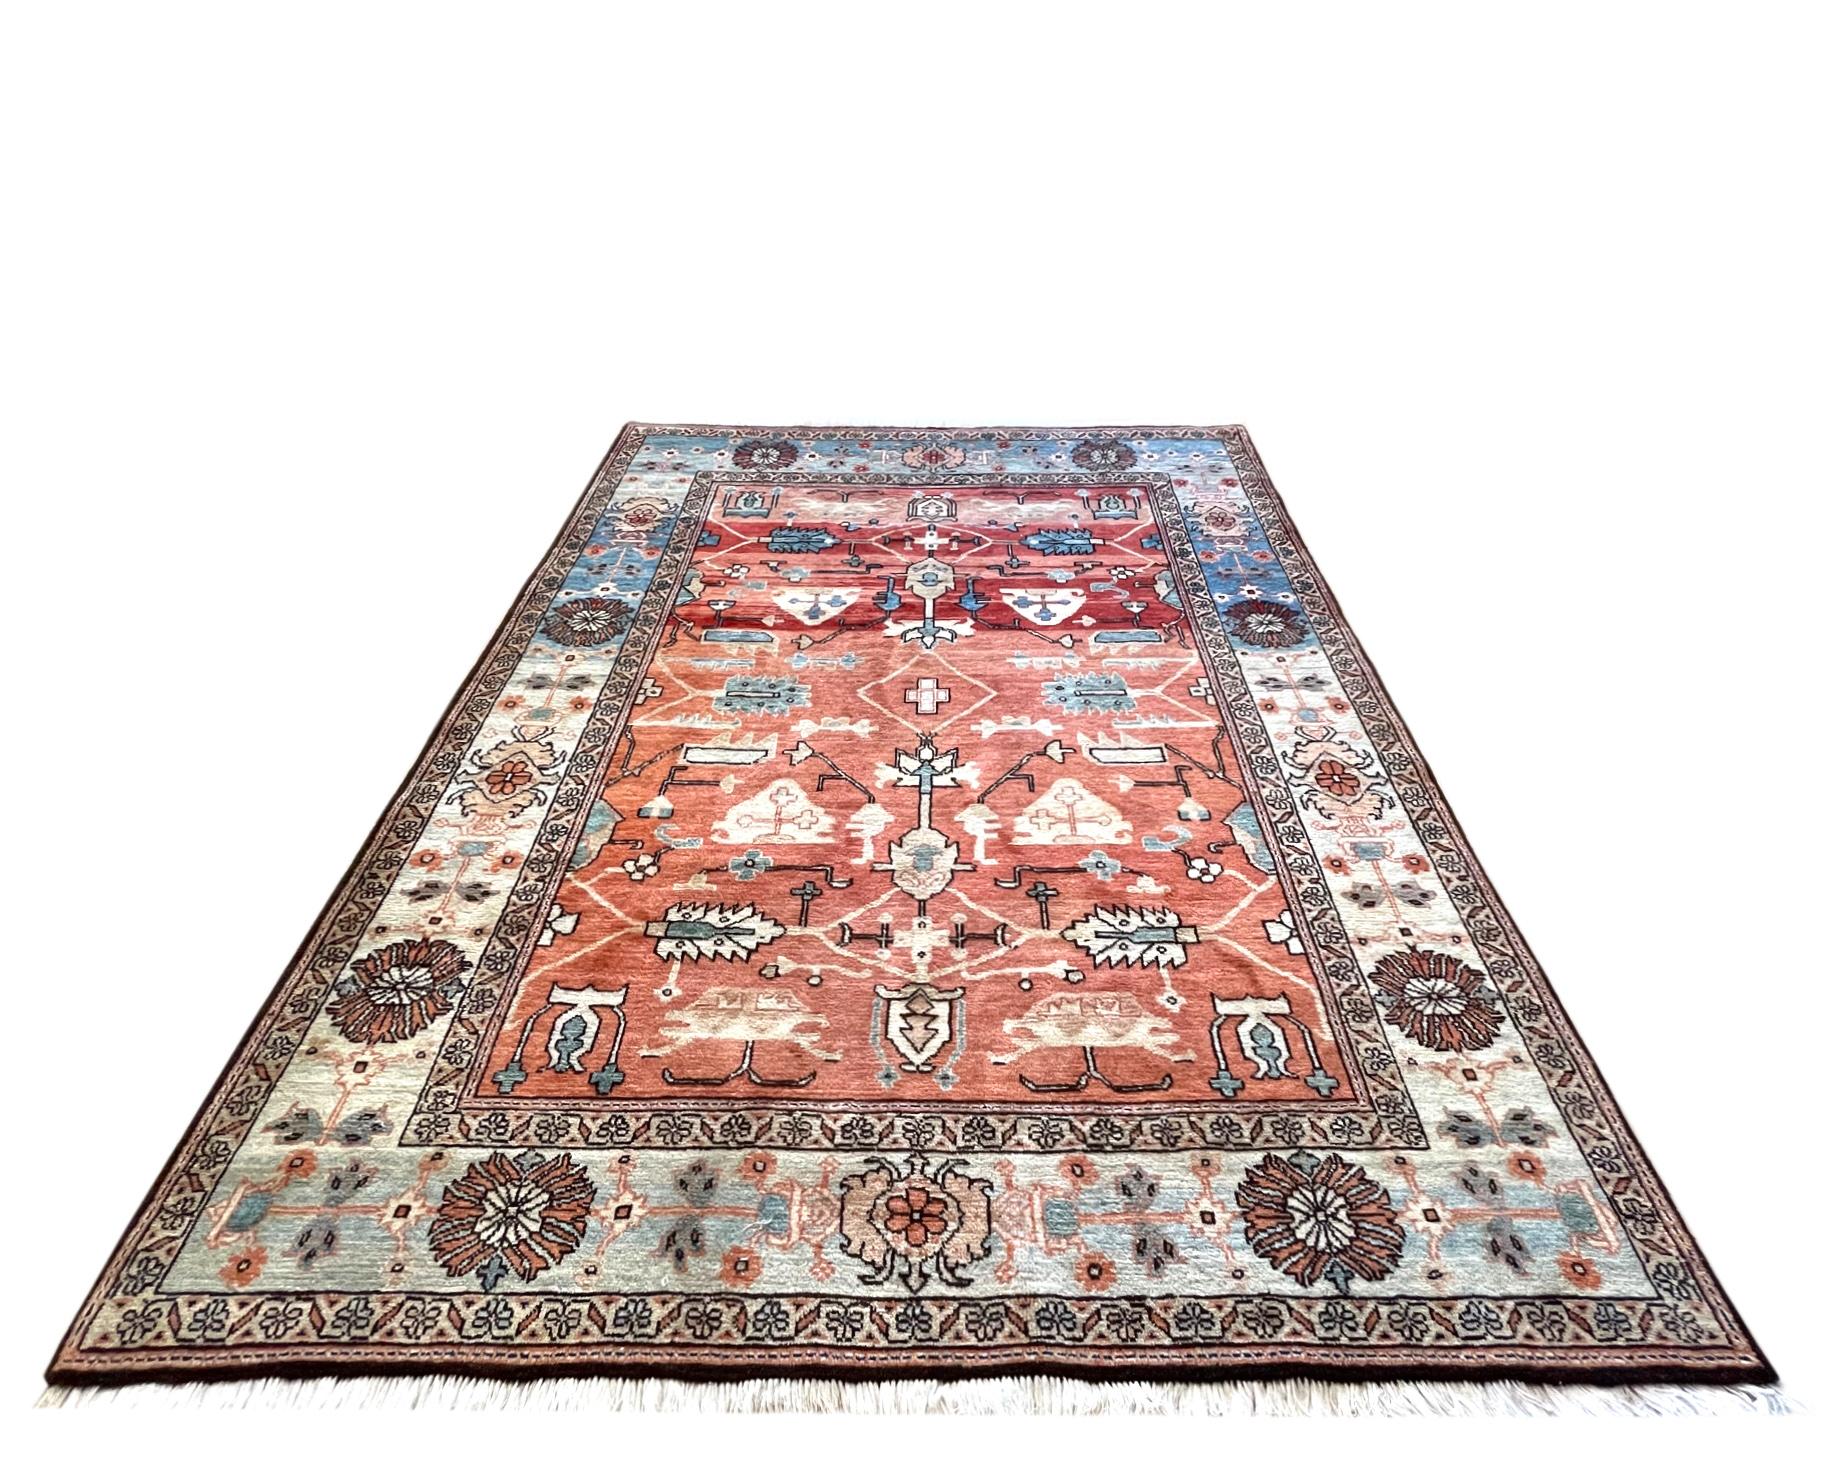 This Persian Tabriz-Heriz rug, Heriz rugs are Persian rugs from the area of Heriz, East Azerbaijan in northwest Iran, northeast of Tabriz. This rug has wool pile and cotton foundation, double hand knotted with an excellent condition. This rug has